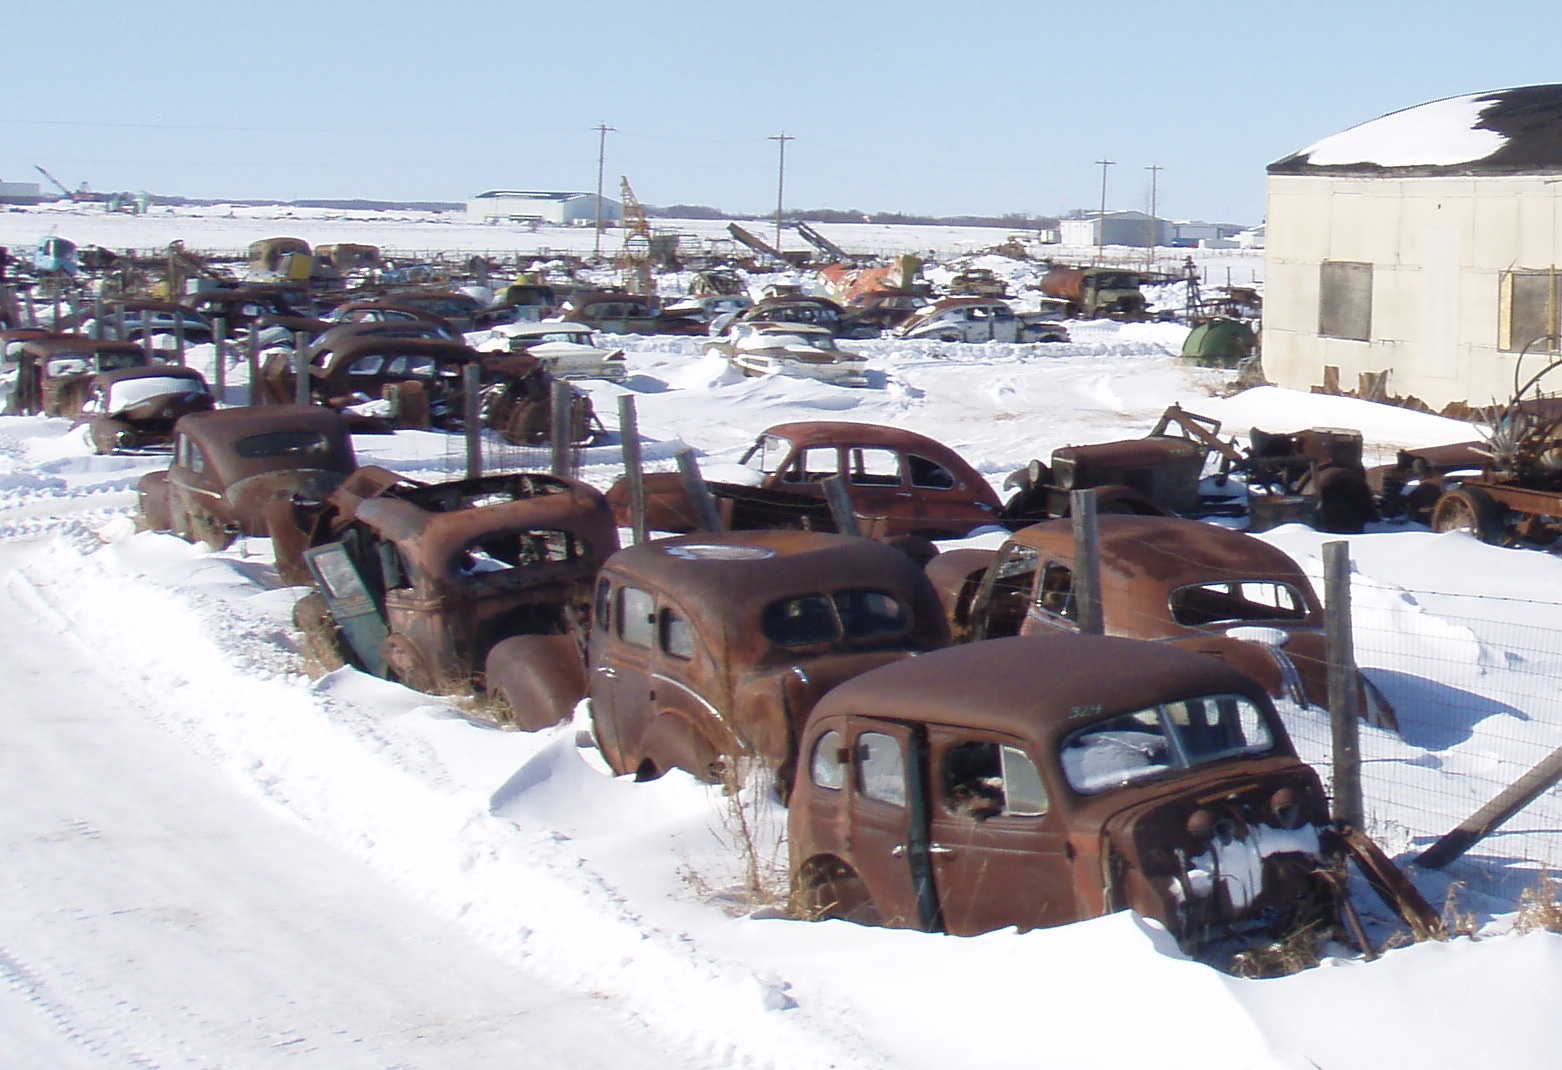 Some cars in this picture were purchased from Reynolds Museum Ltd. (Stan Reynolds) for customers